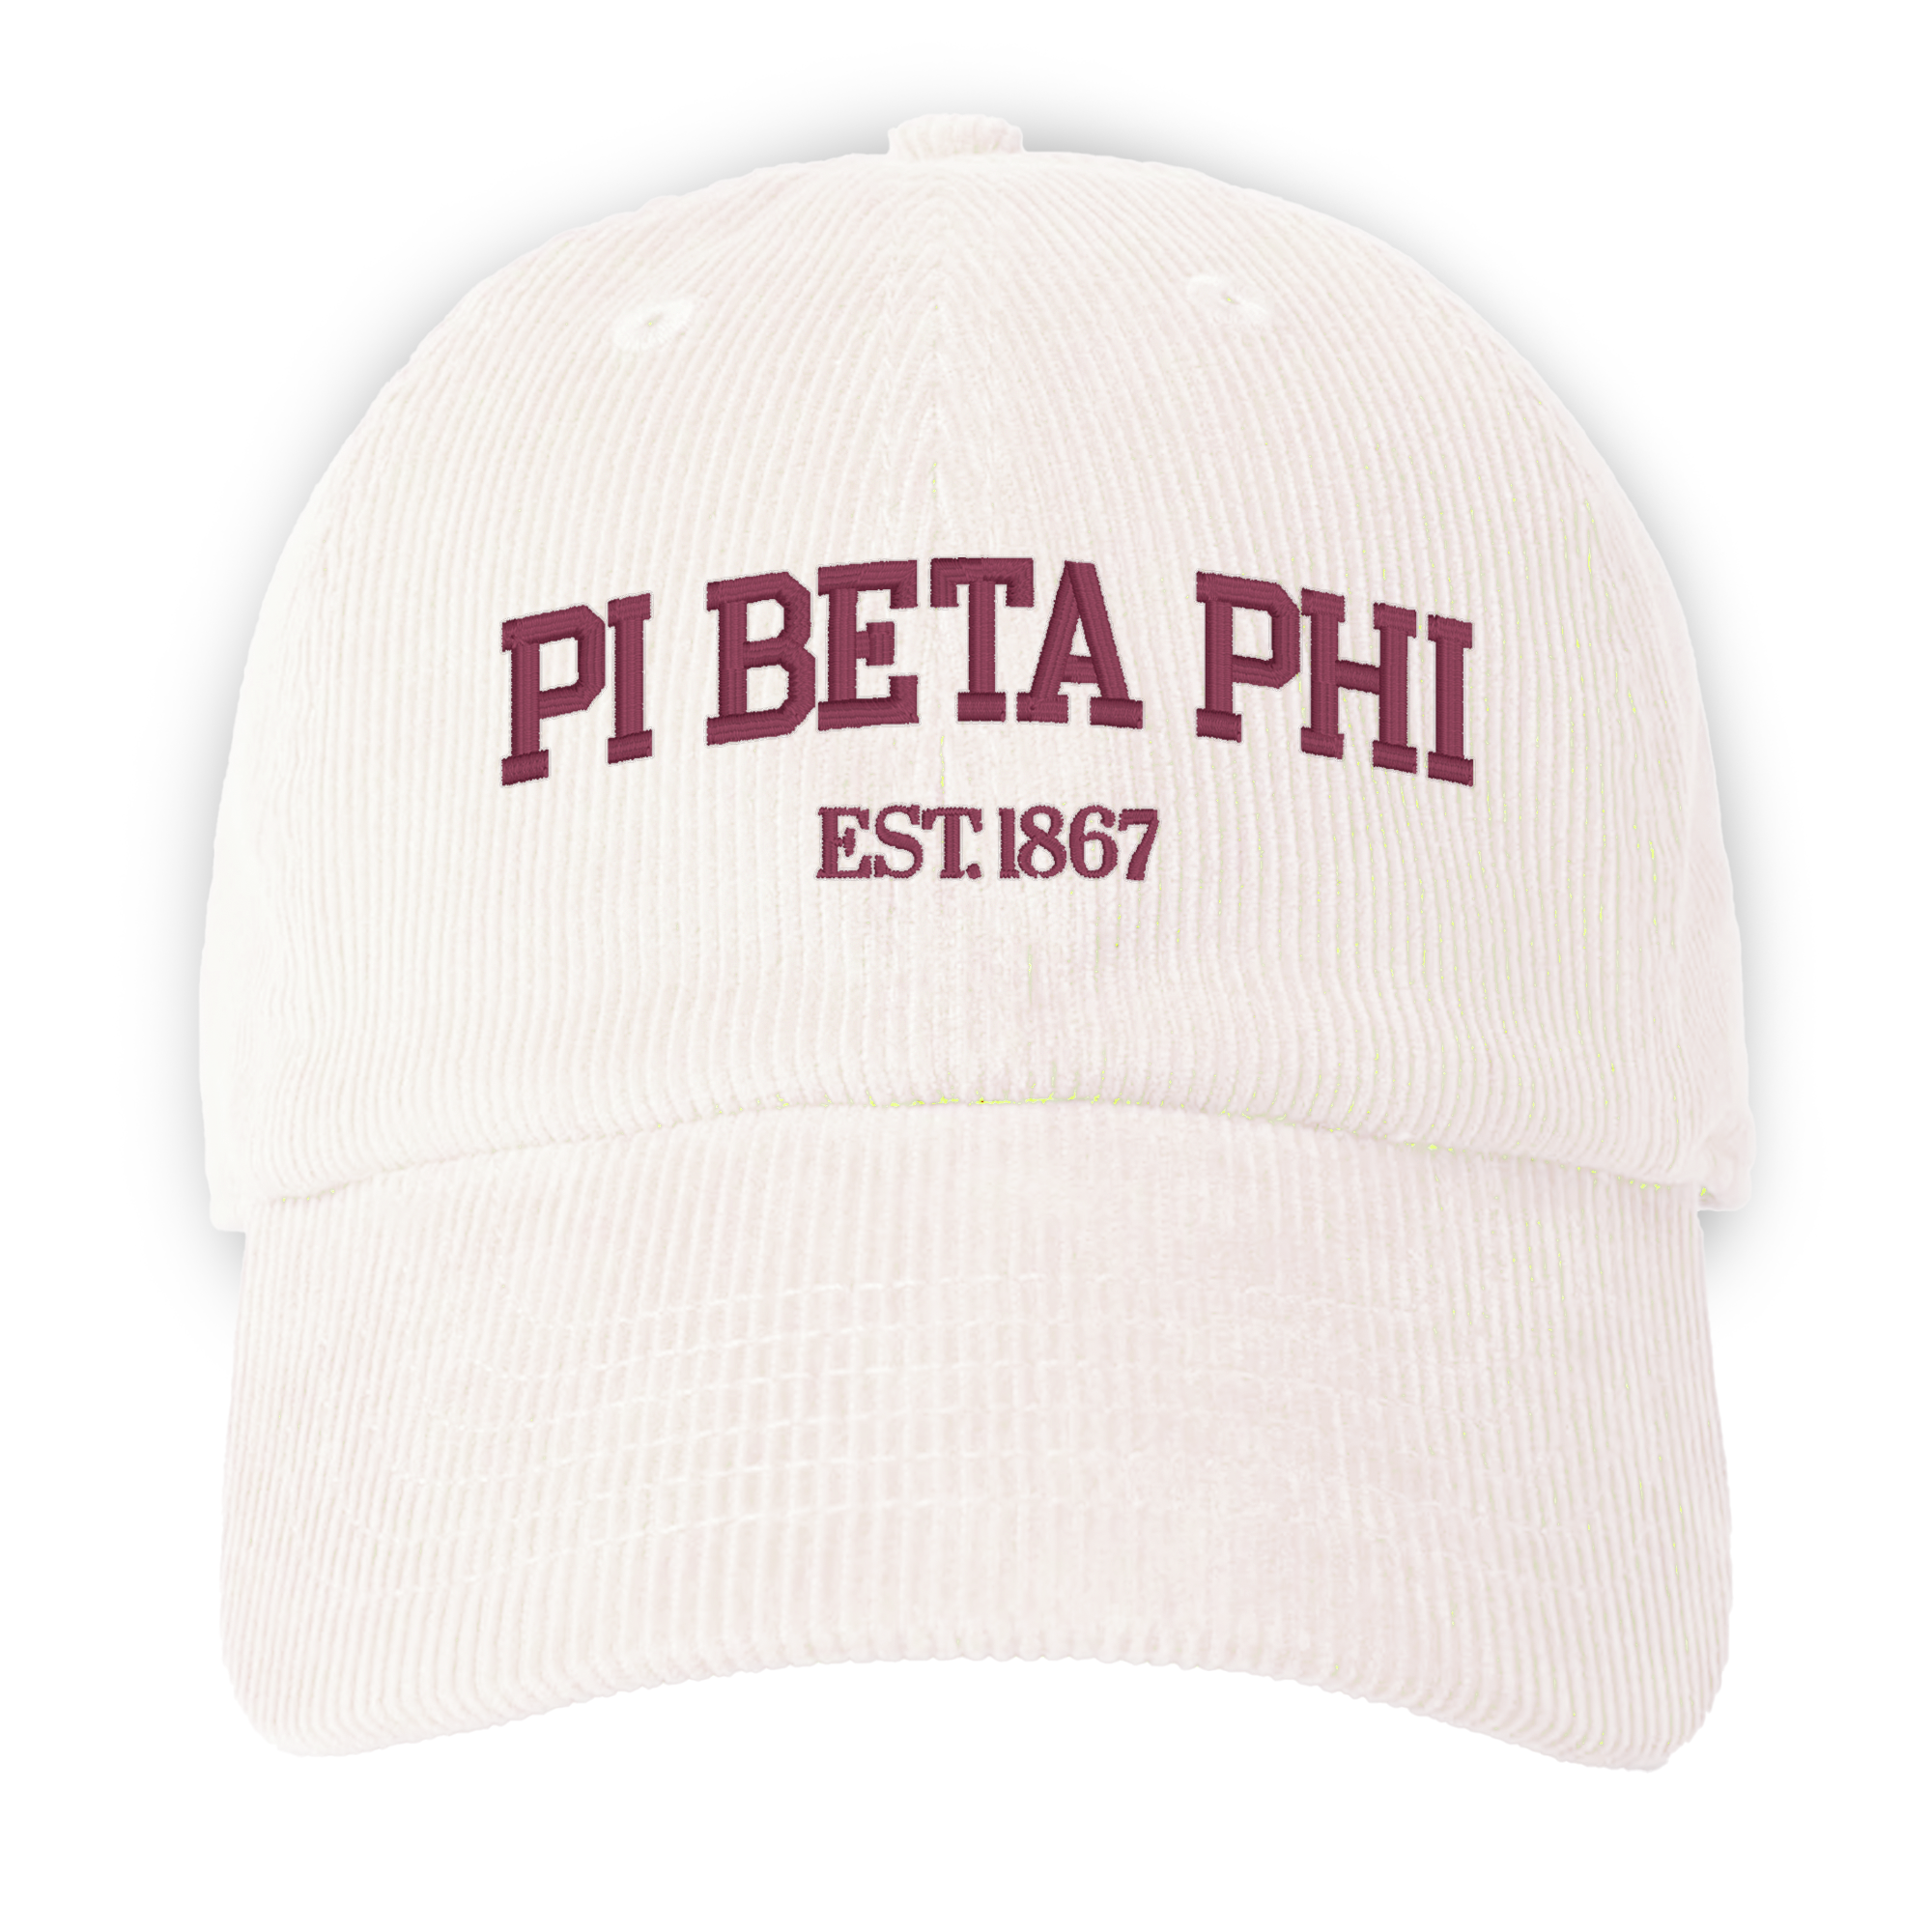 a white hat with the word piebta phi on it